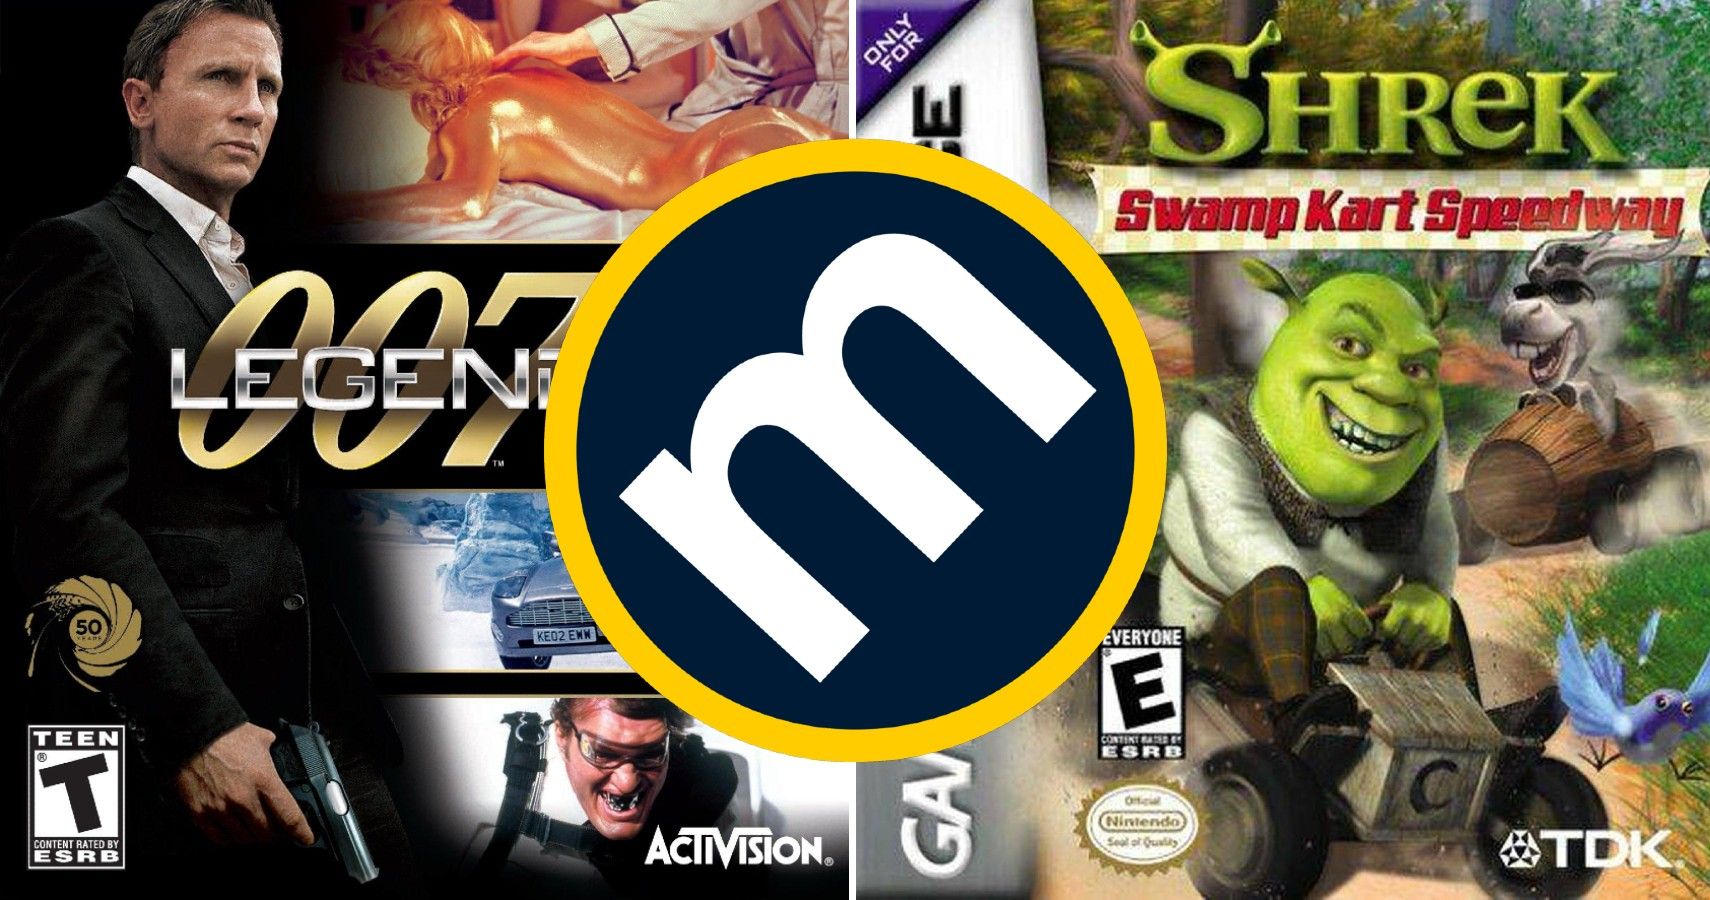 The 25 Worst Video Games Of All Time, Ranked According To Metacritic